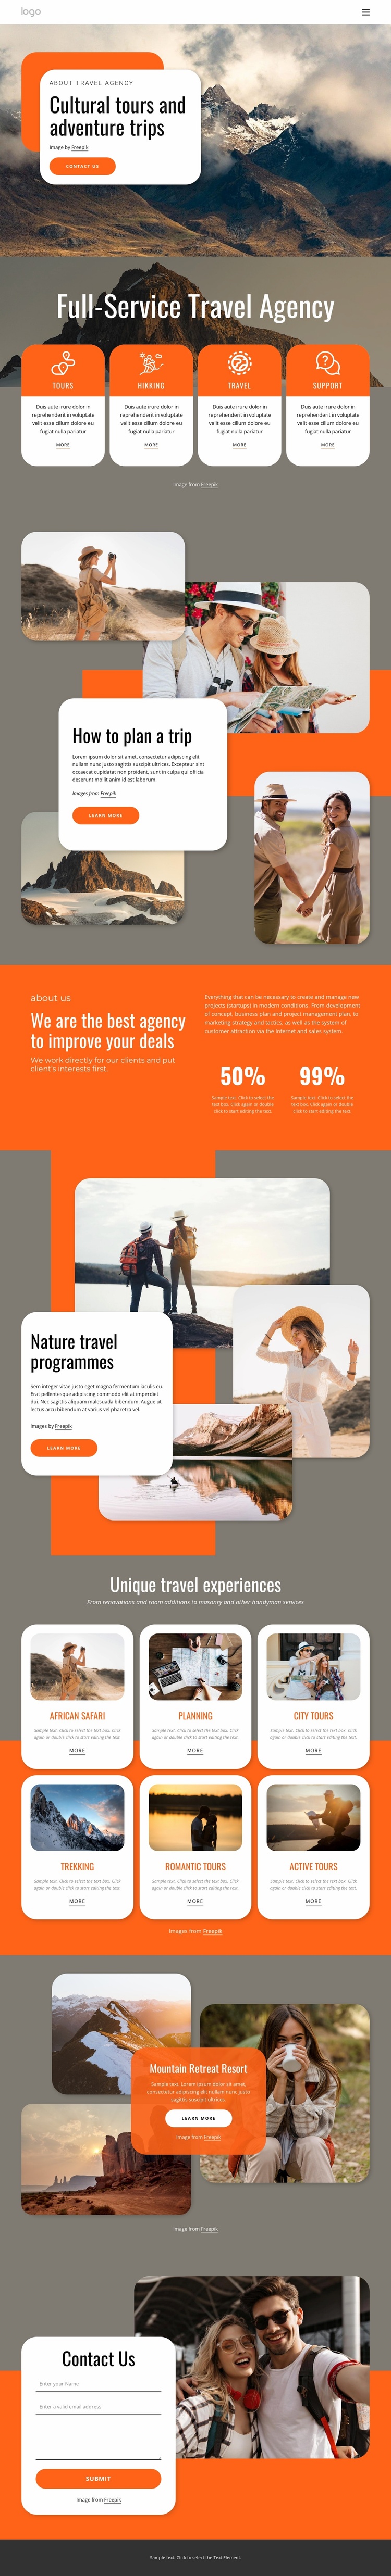 Group travel for all ages eCommerce Template